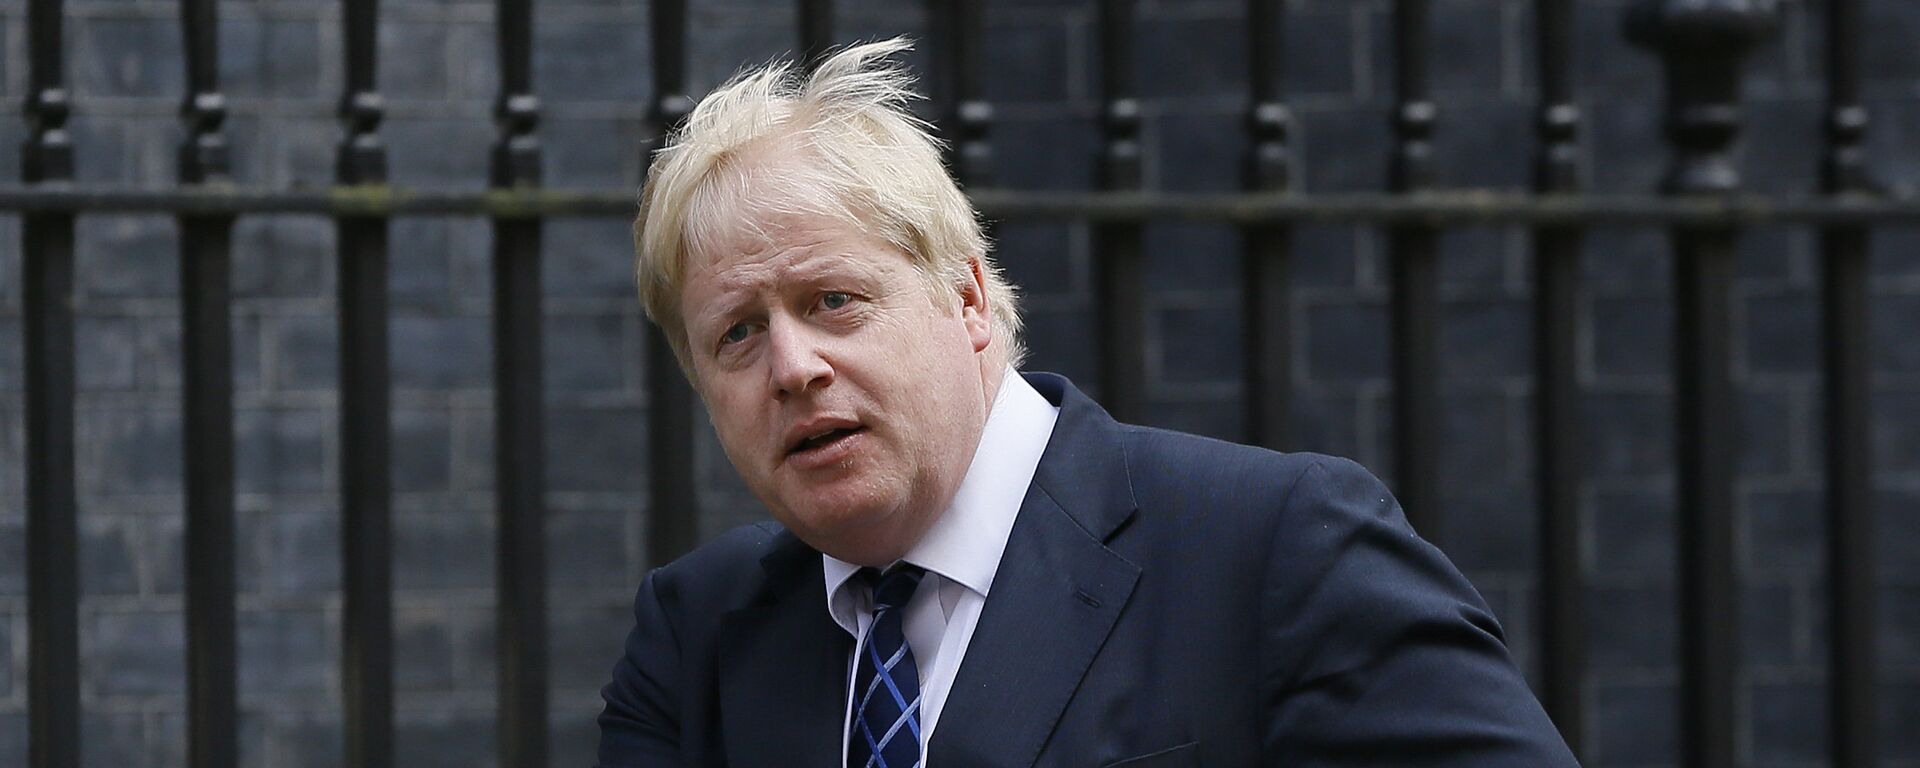 Boris Johnson, the Mayor of London arrives for a meeting at Downing Street in London, Tuesday, March 22, 2016 - Sputnik Mundo, 1920, 28.01.2022